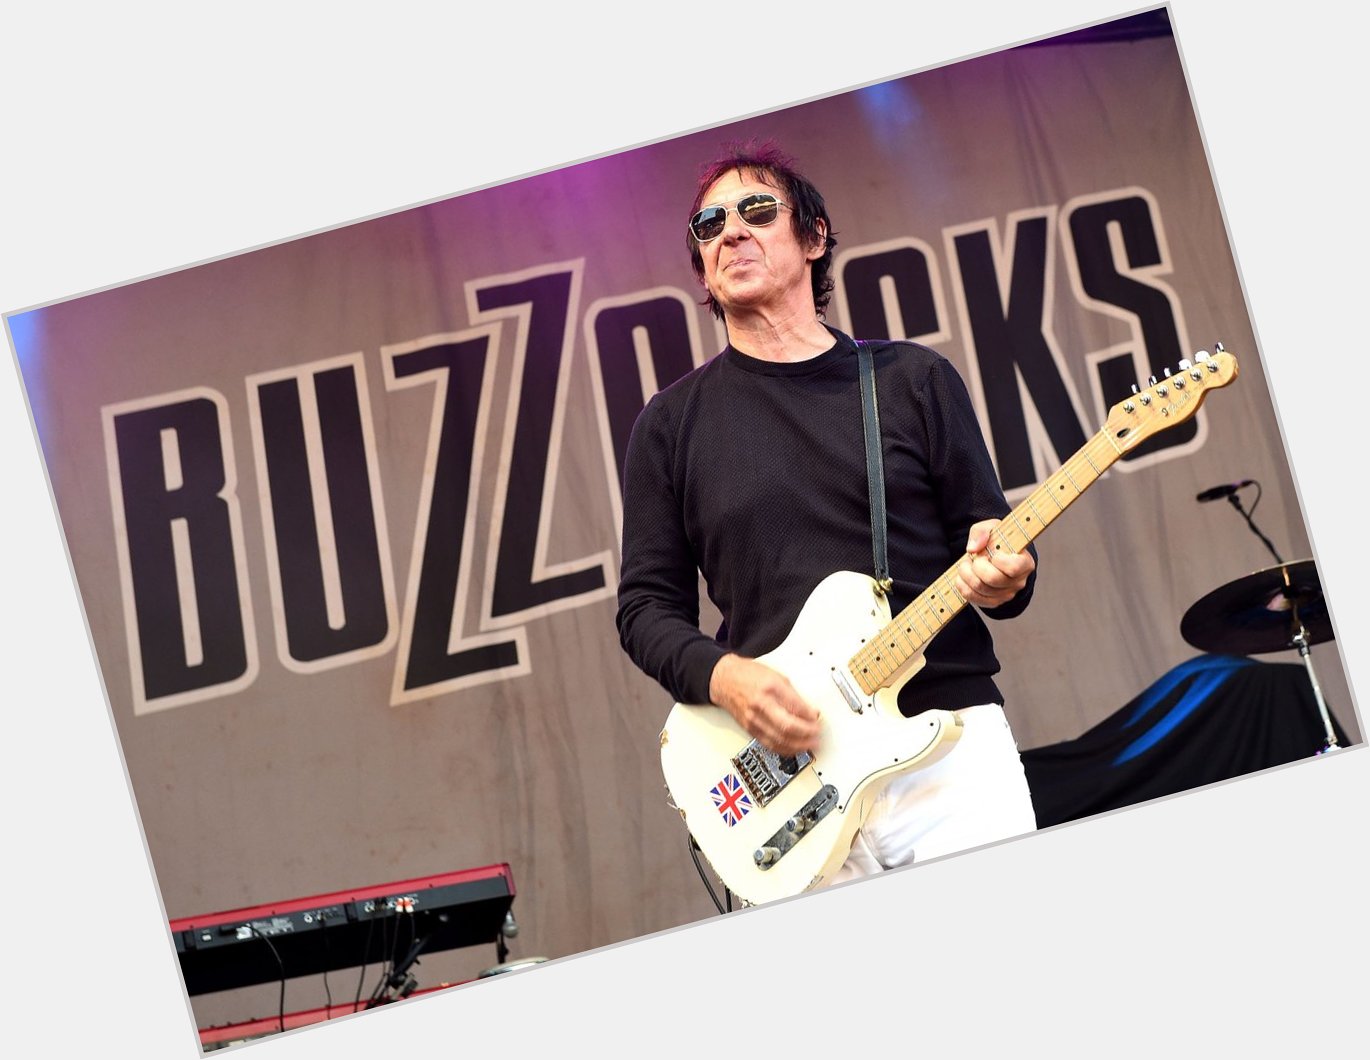 Big birthdays and release on May 7. Happy birthday to Buzzcocks Steve Diggle! 